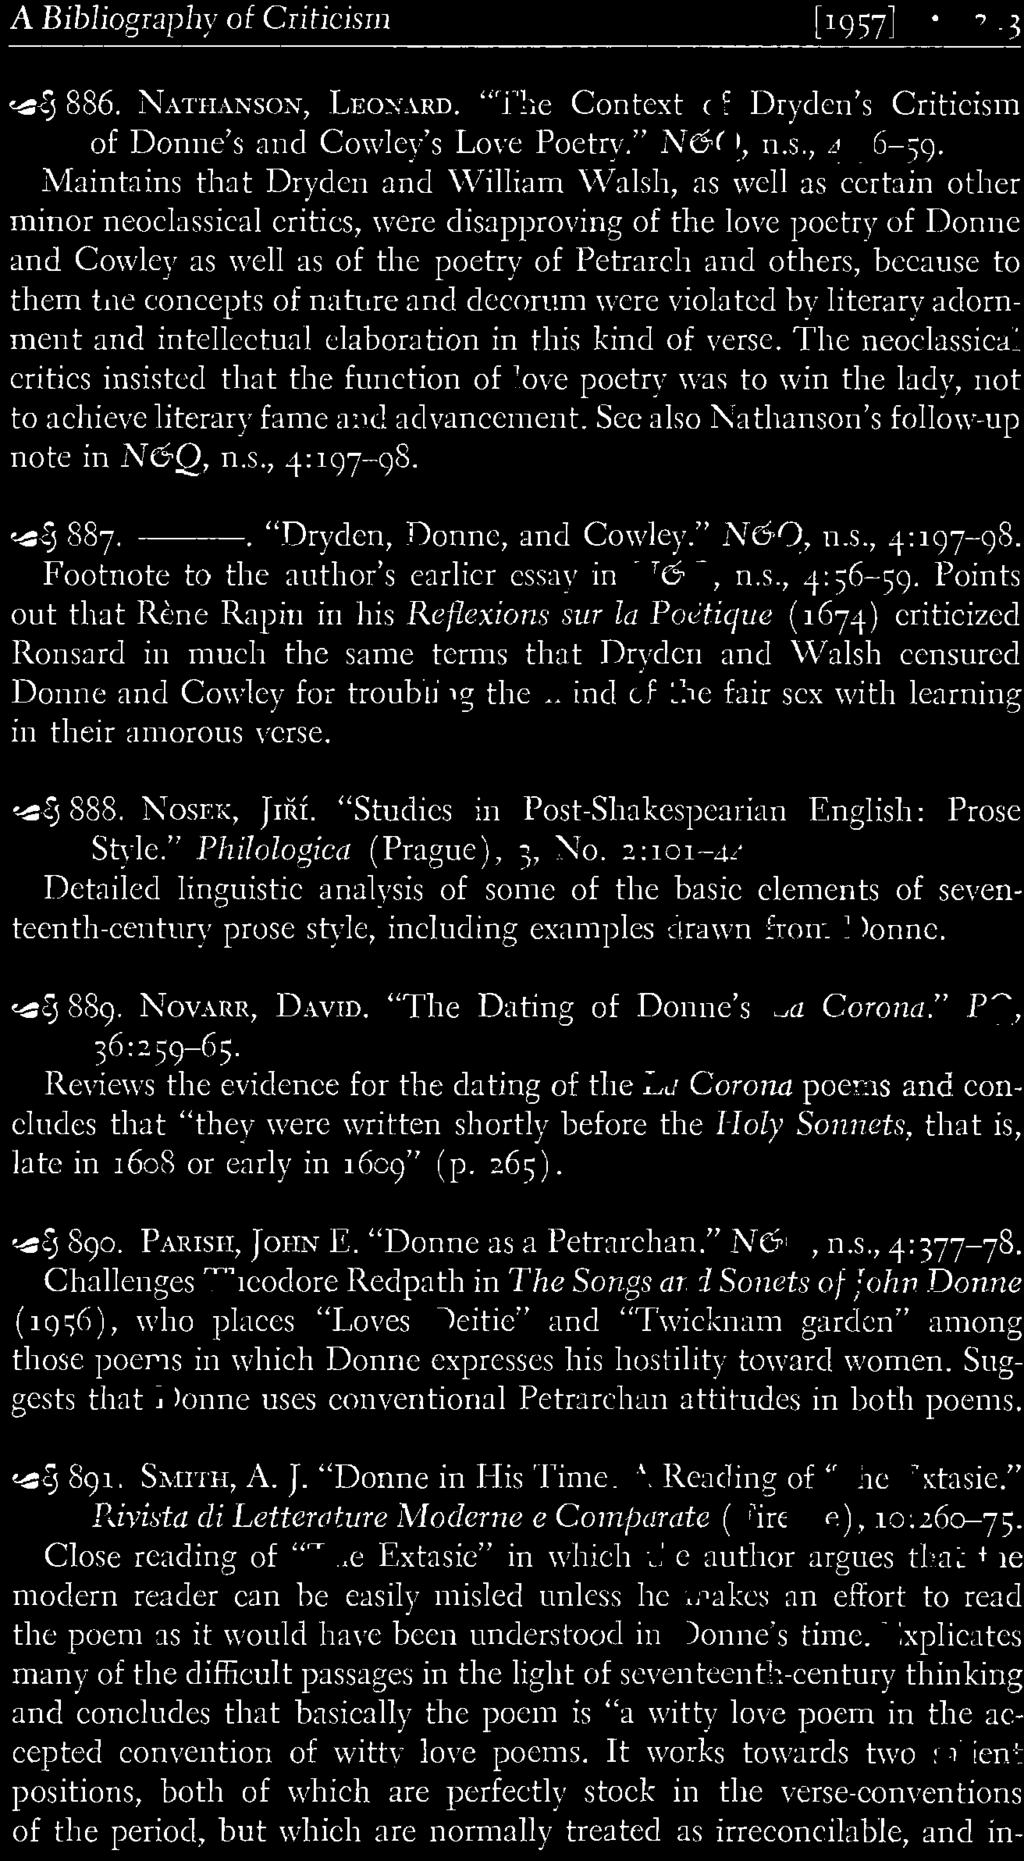 . "Dryden, Donne, and Cowley." N6Q, n.s., 4:197-<)8. Footnote to the author's earlier essay in N6Q, n.s., 4: 56-59.